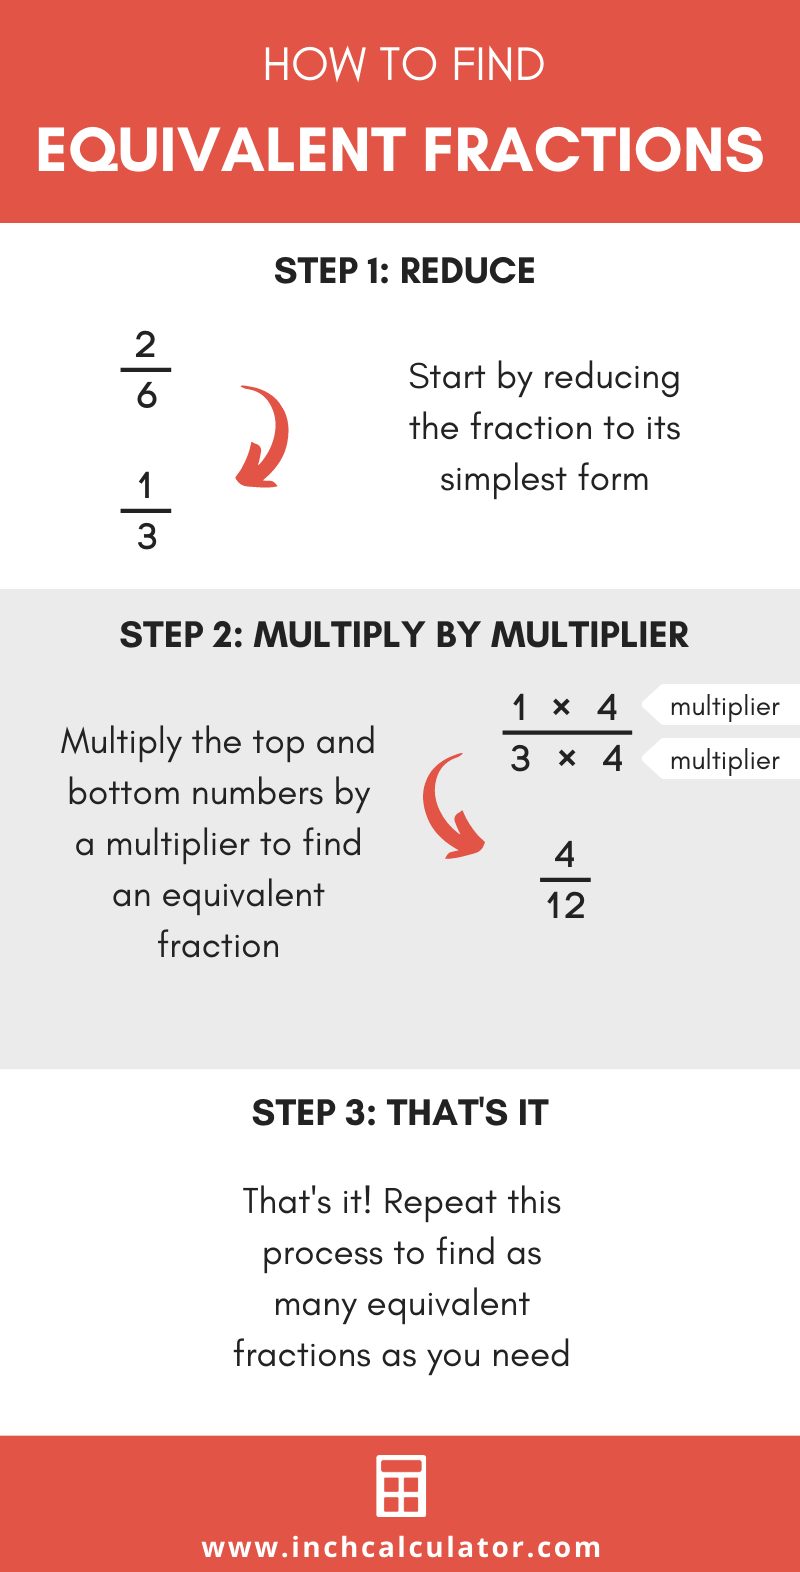 How to make fractions equivalent - ISEE Lower Level Quantitative